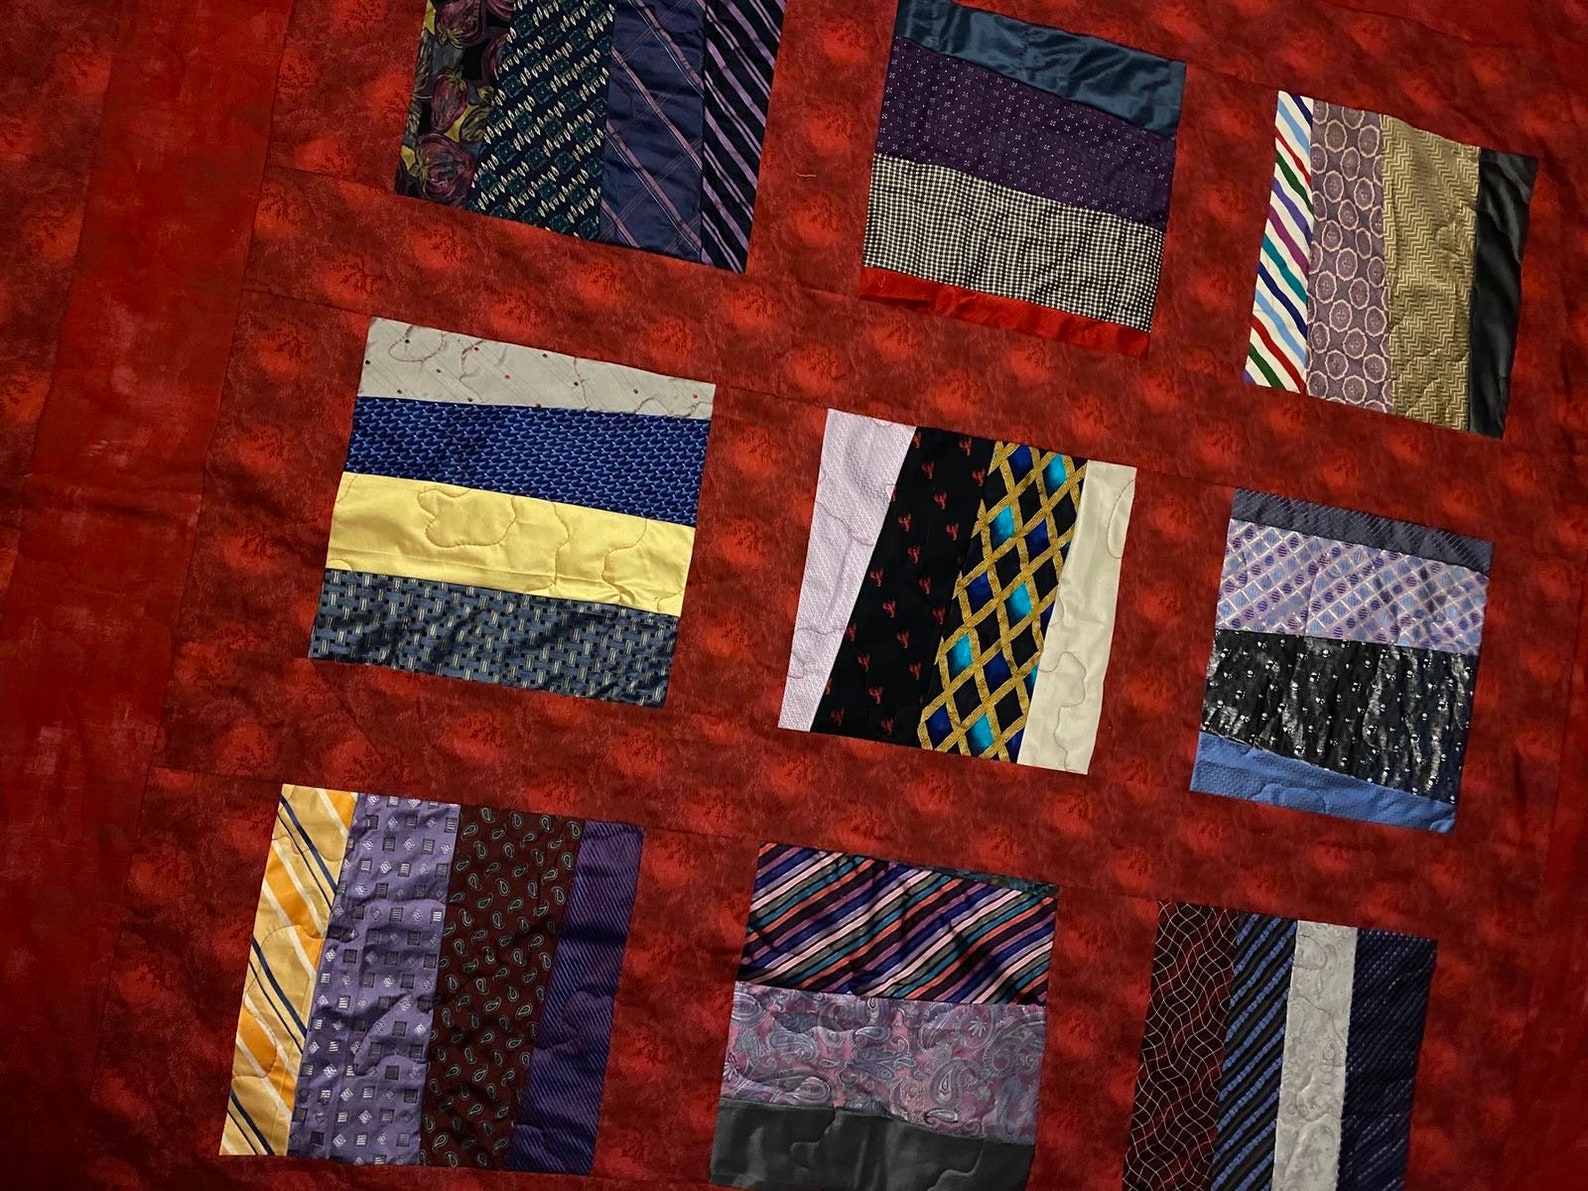 Handmade Memory Quilt From Neck Ties - Etsy